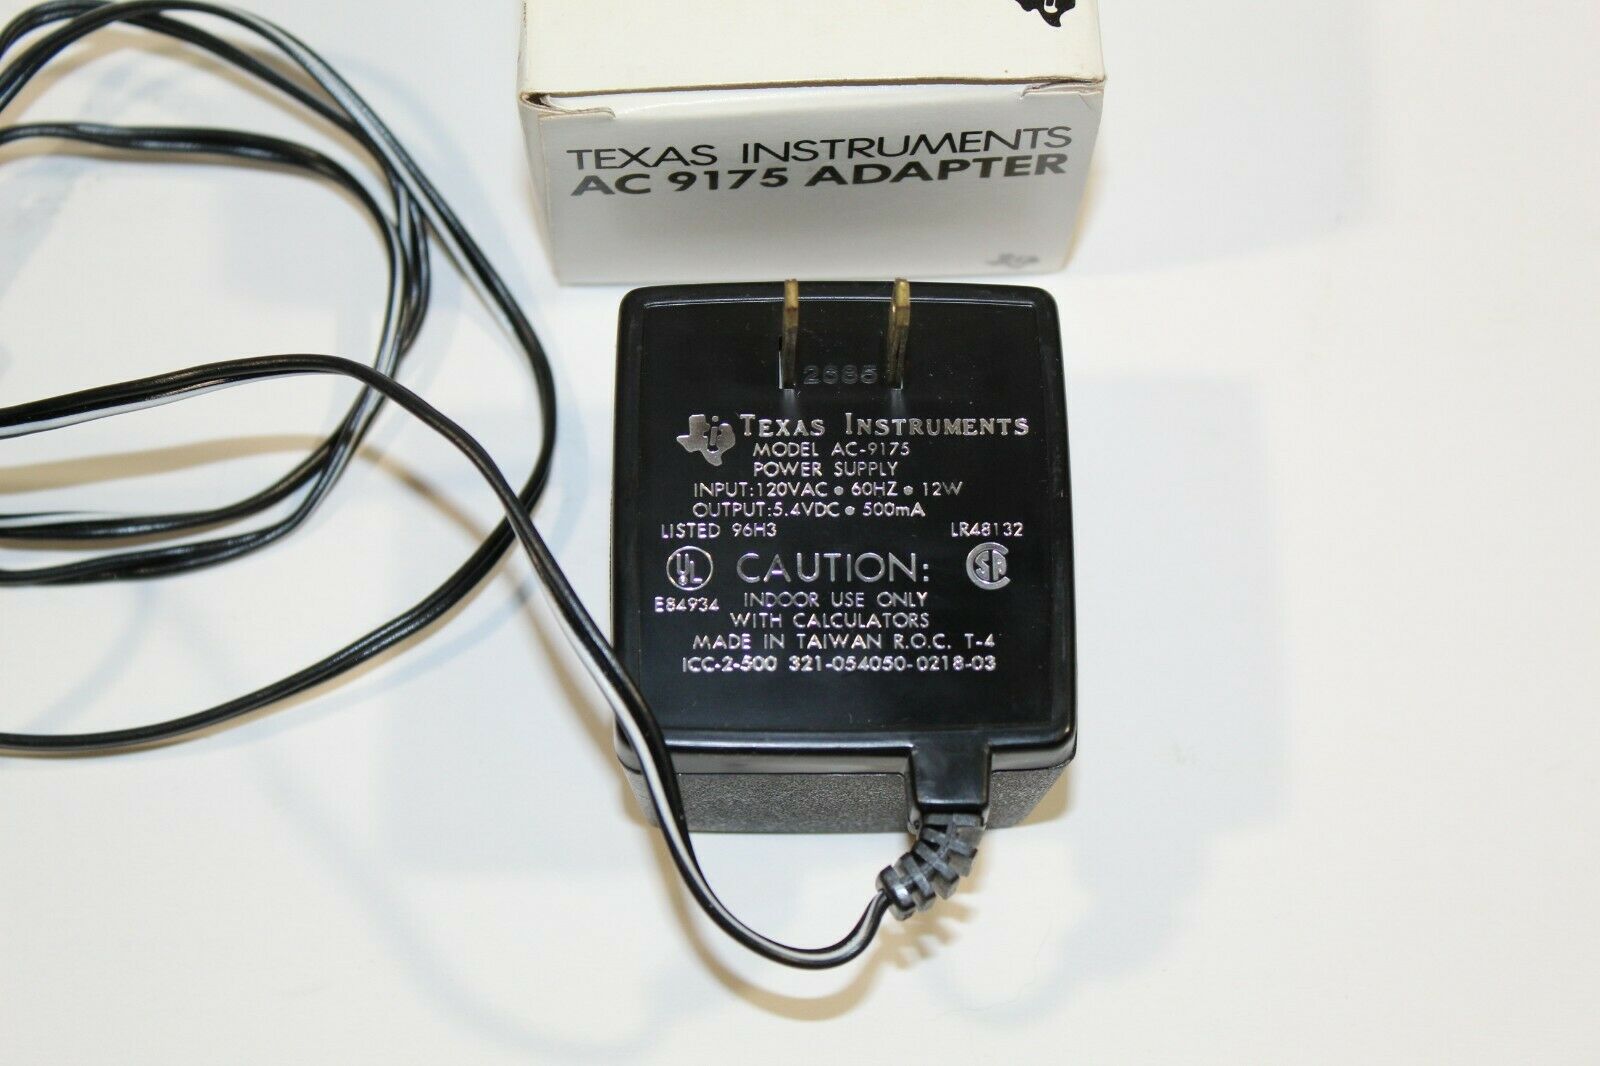 NEW TEXAS INSTRUMENTS AC-9175A AC-9175 5.4VDC 500mA AC DC WALL WART POWER SUPPLY ADAPTER CORD - Click Image to Close